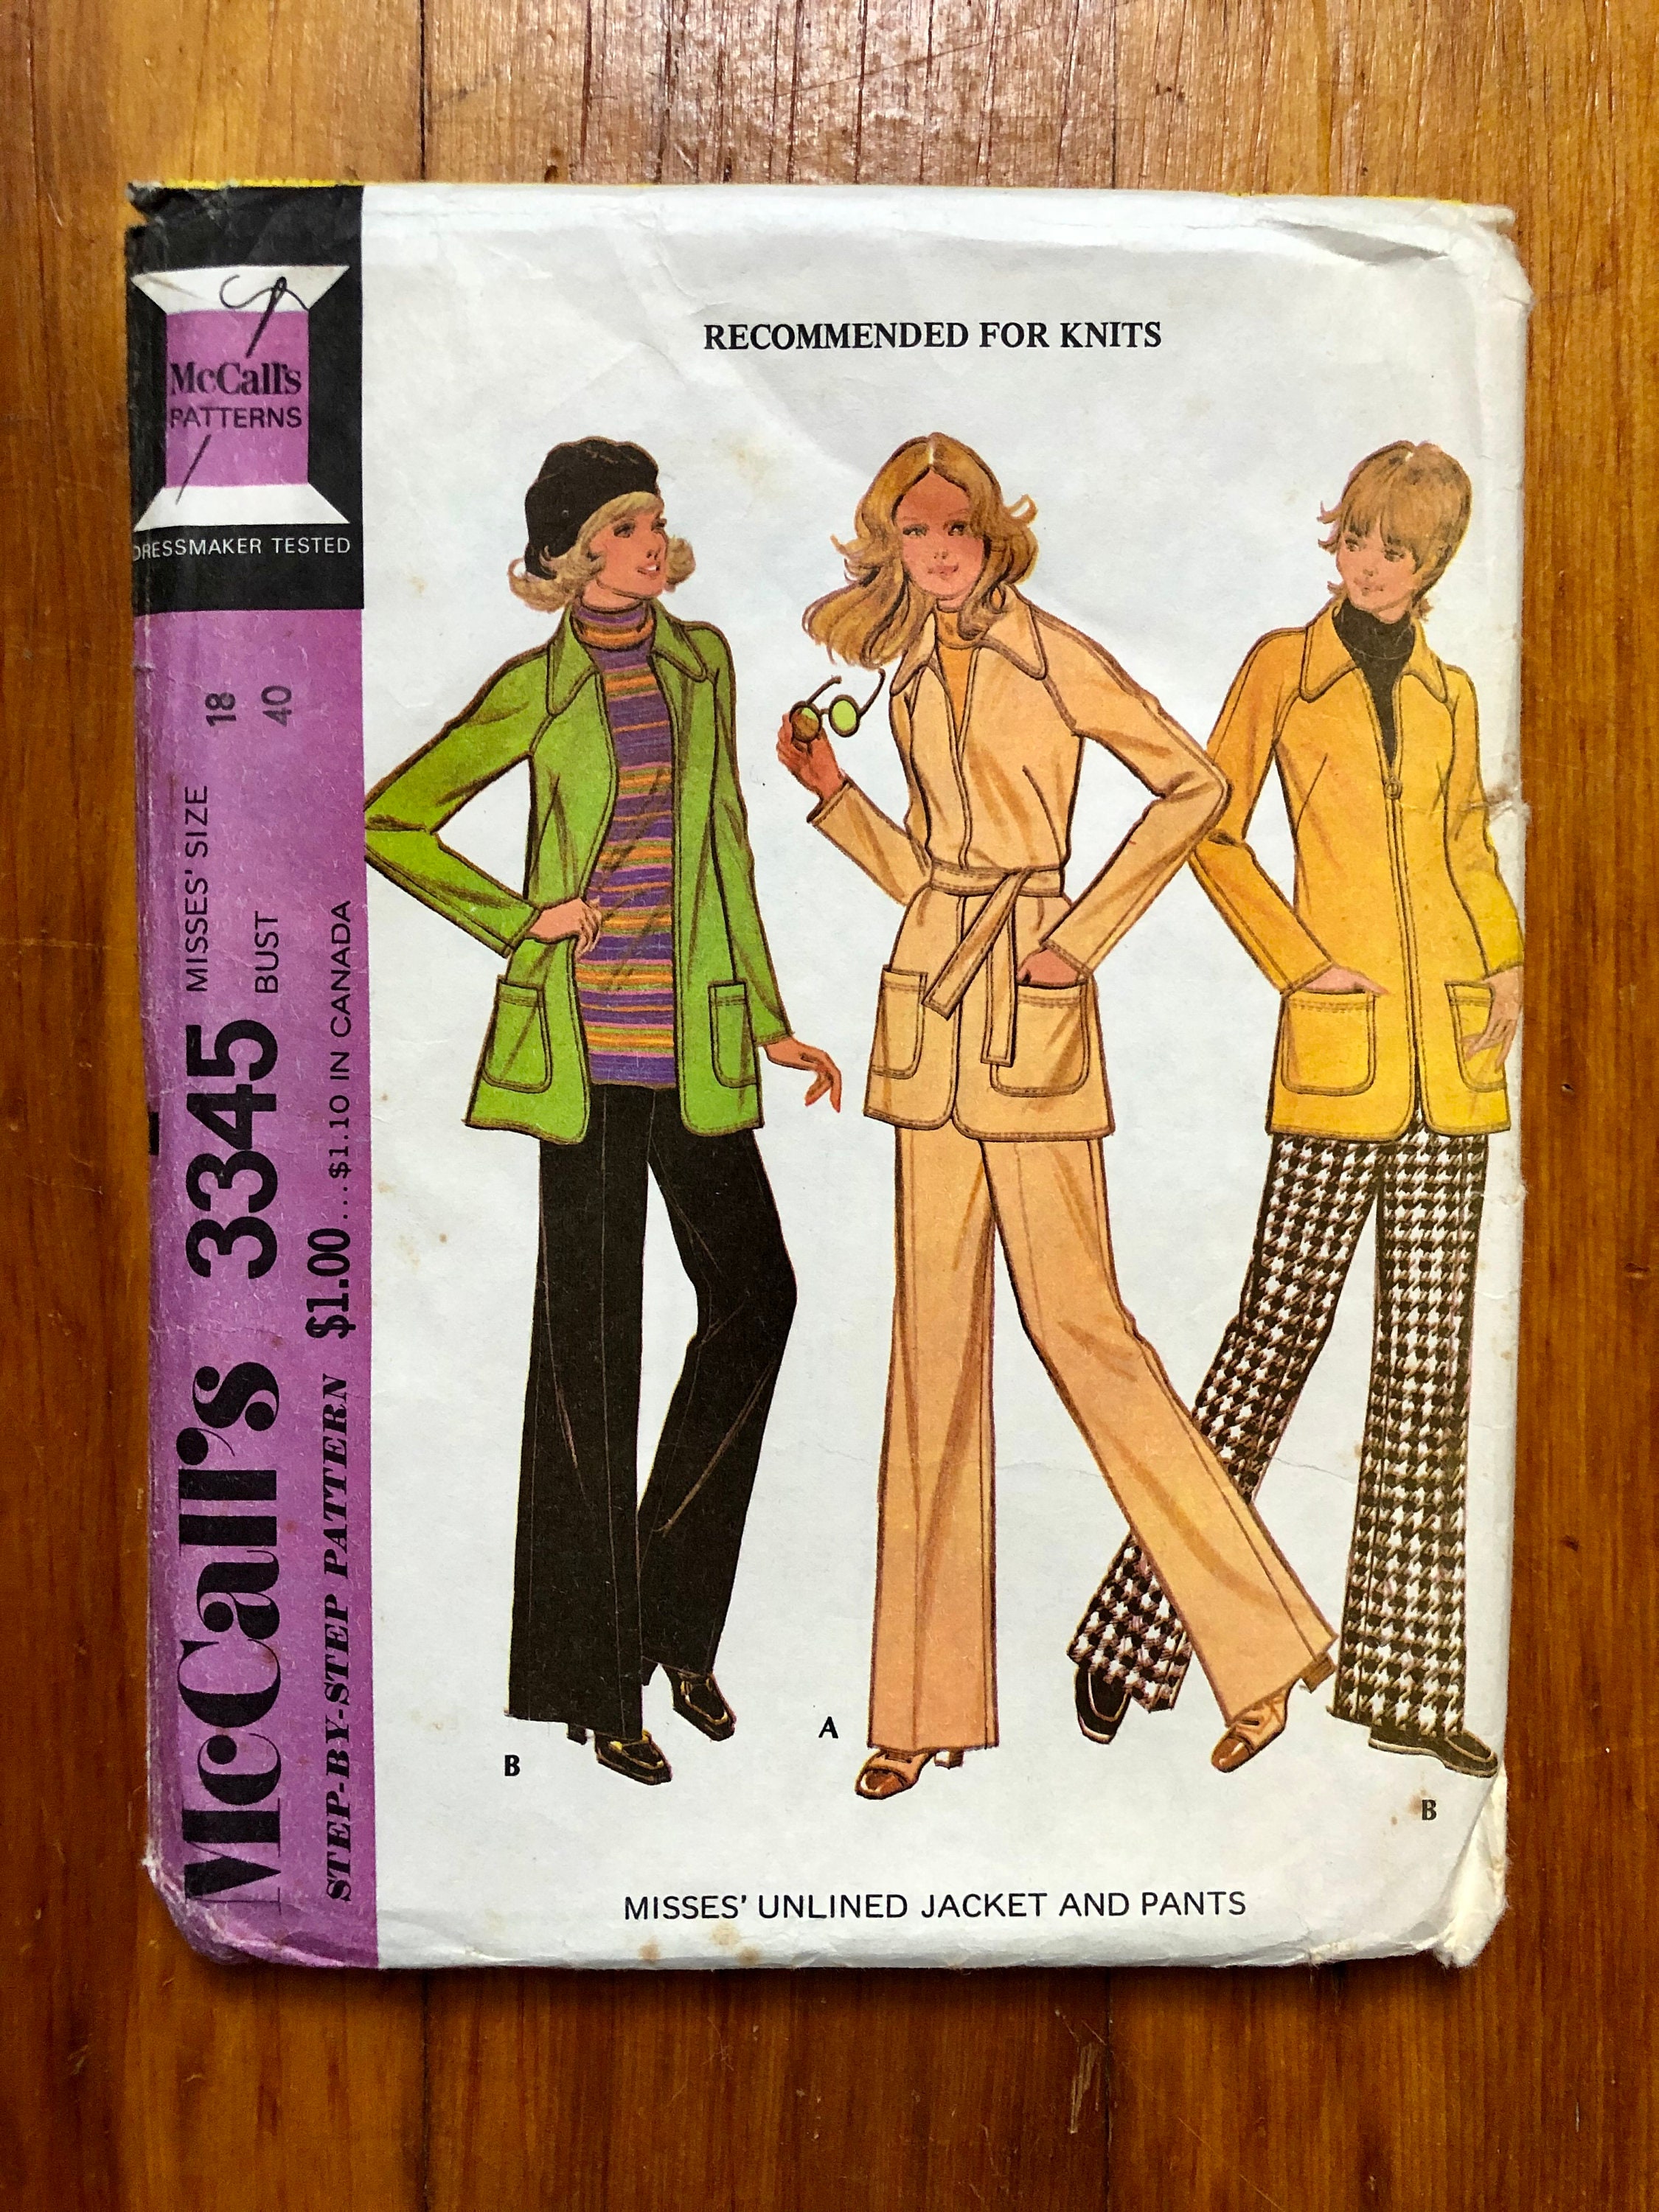 McCalls Sewing Patterns NEW/Used/Vintage Clothing Crafts and More